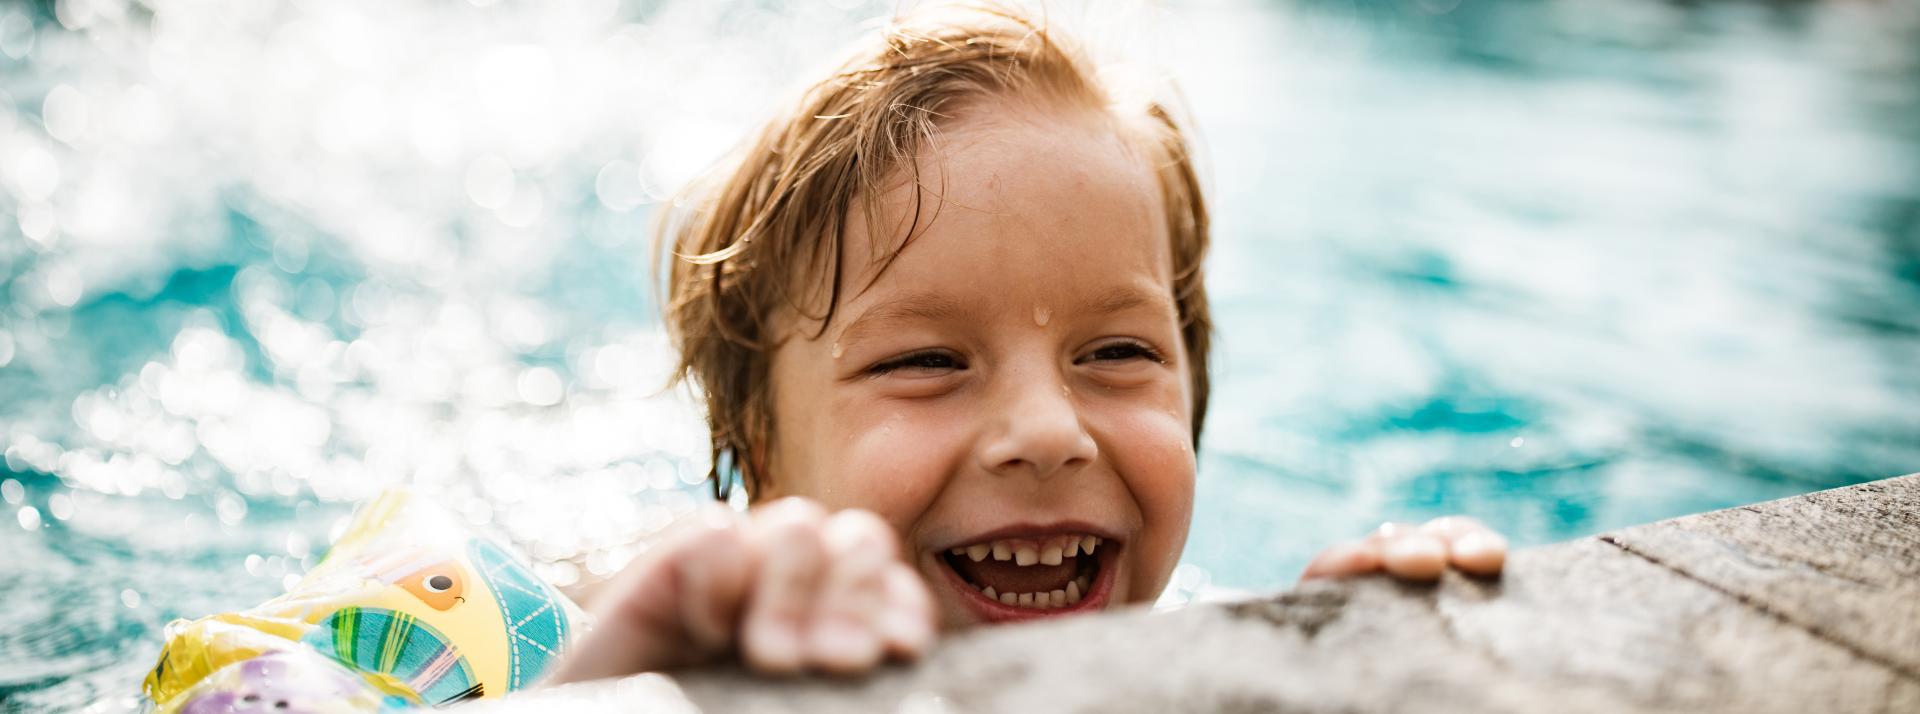 A happy child wearing water wings holding the edge of an outdoor pool on a sunny day.